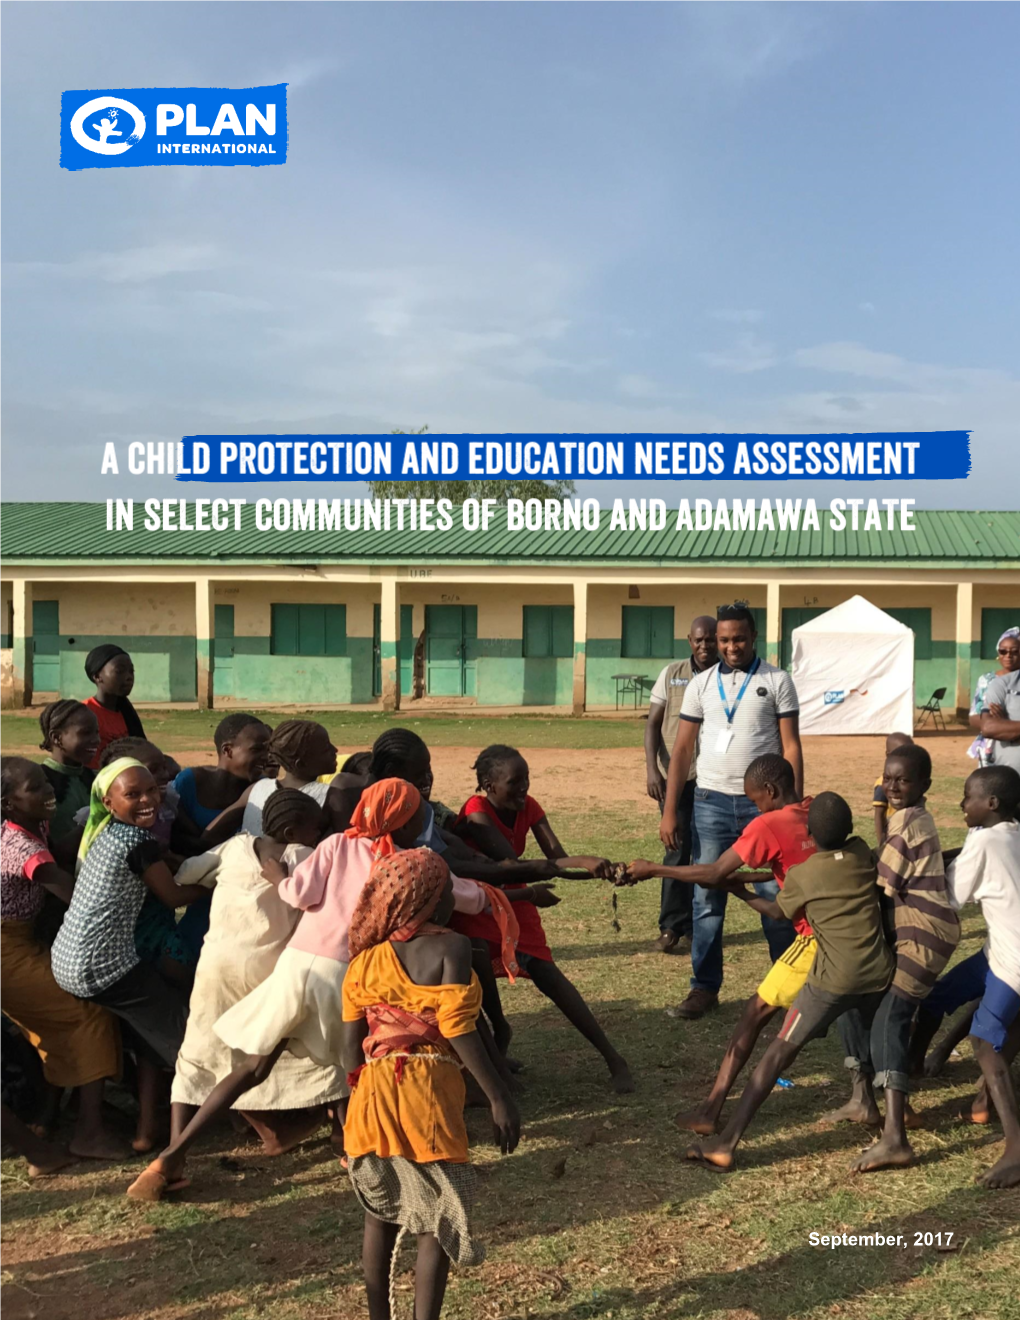 Child Protection and Education Needs Assessment in Nigeria